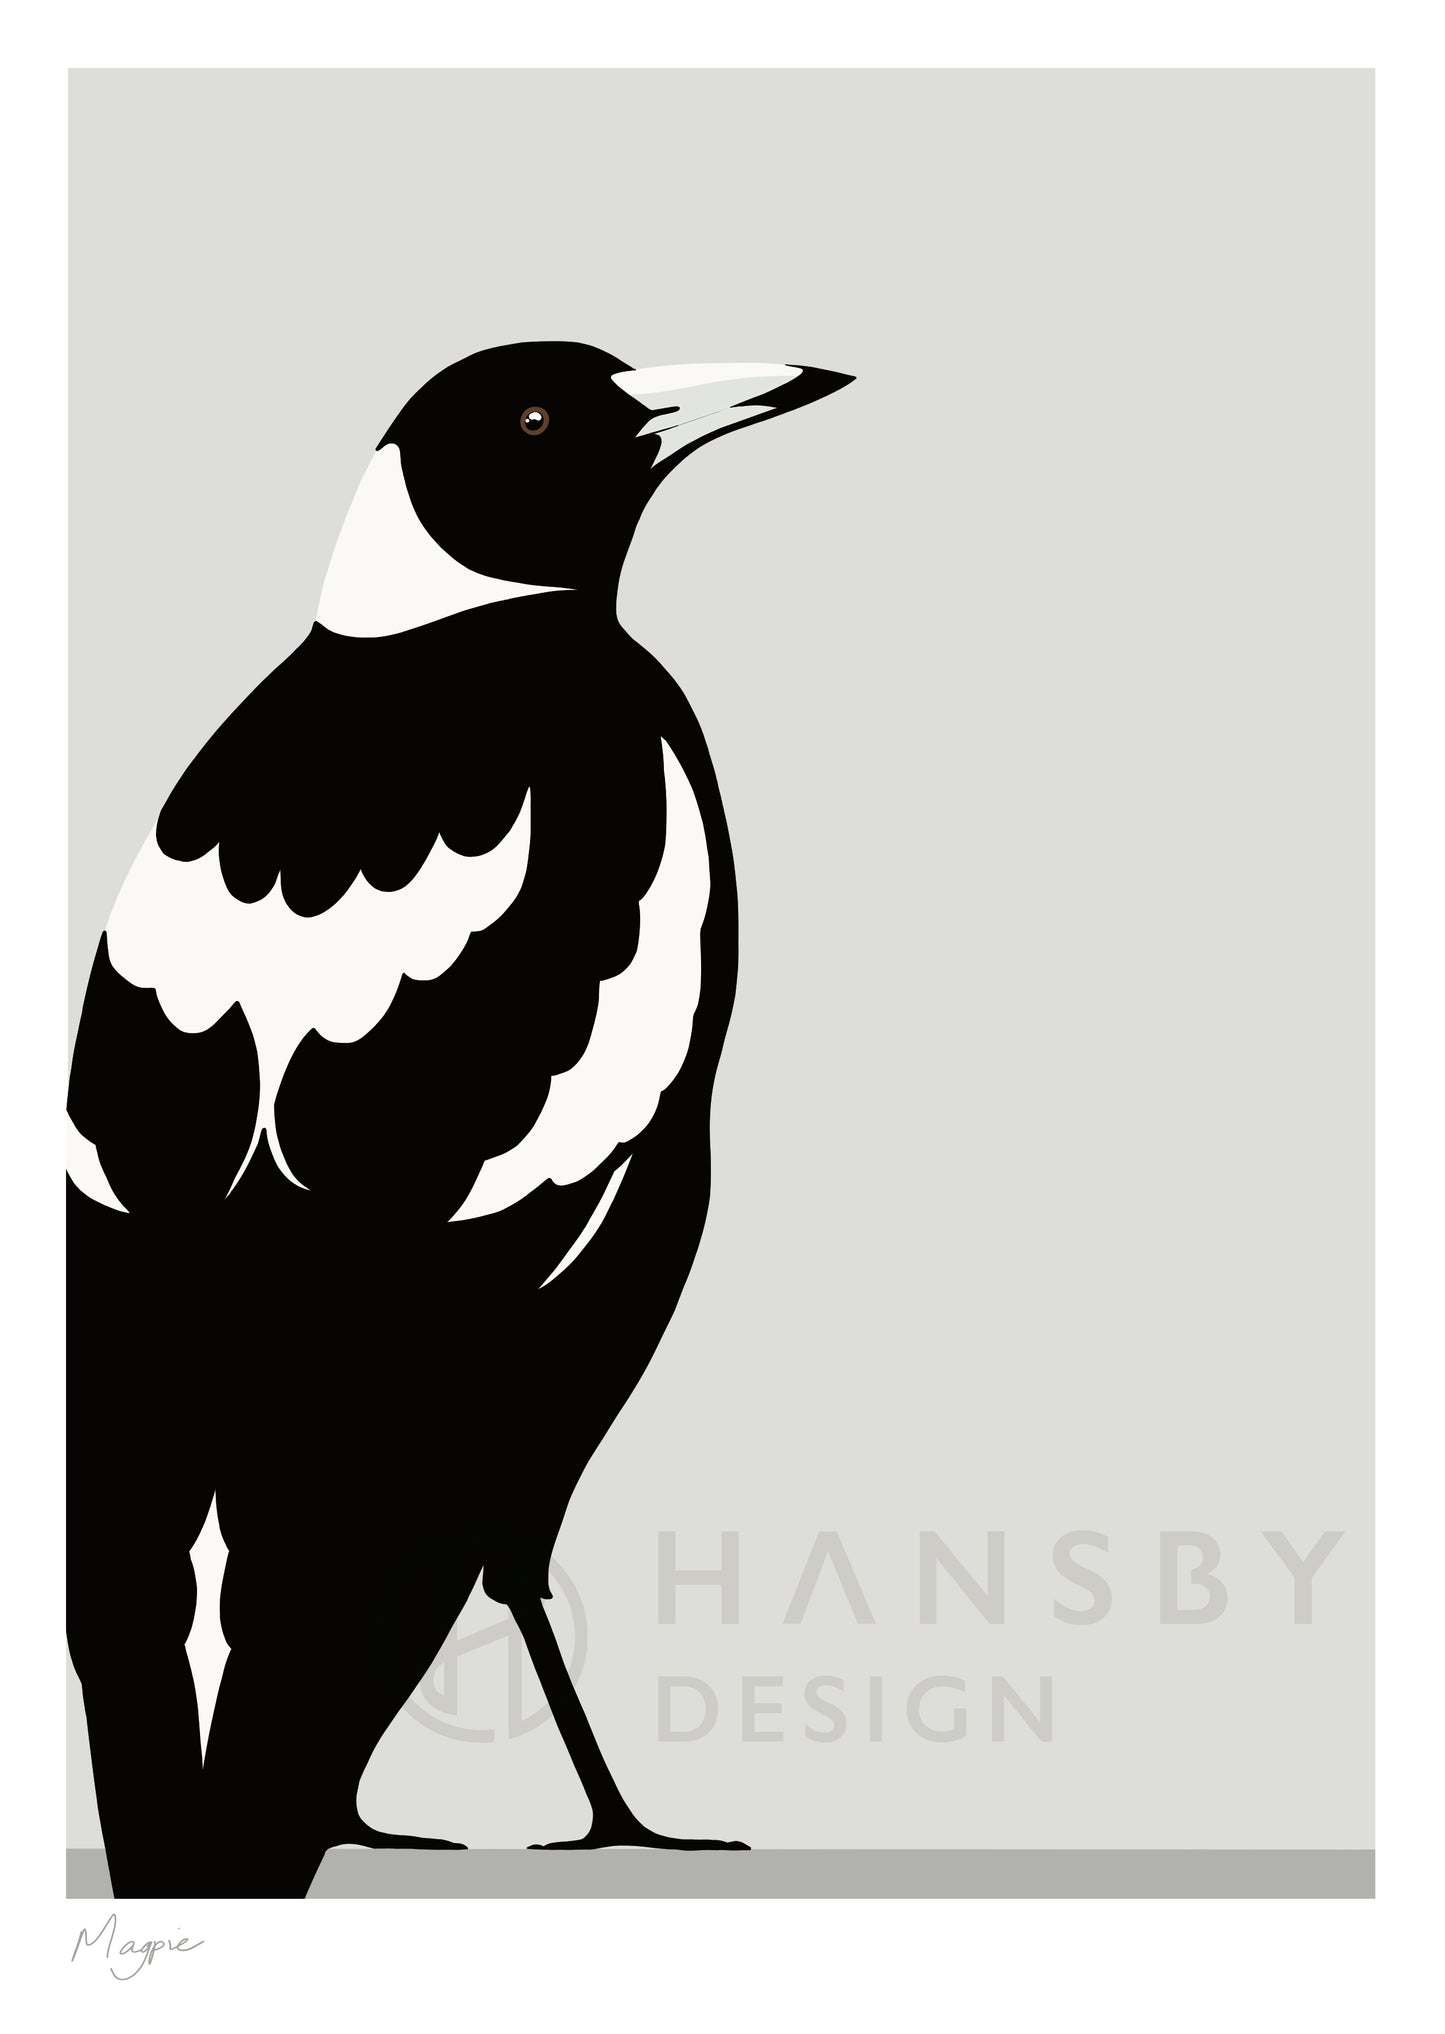 Minimal art print of the Magpie bird, by Hansby Design New Zealand